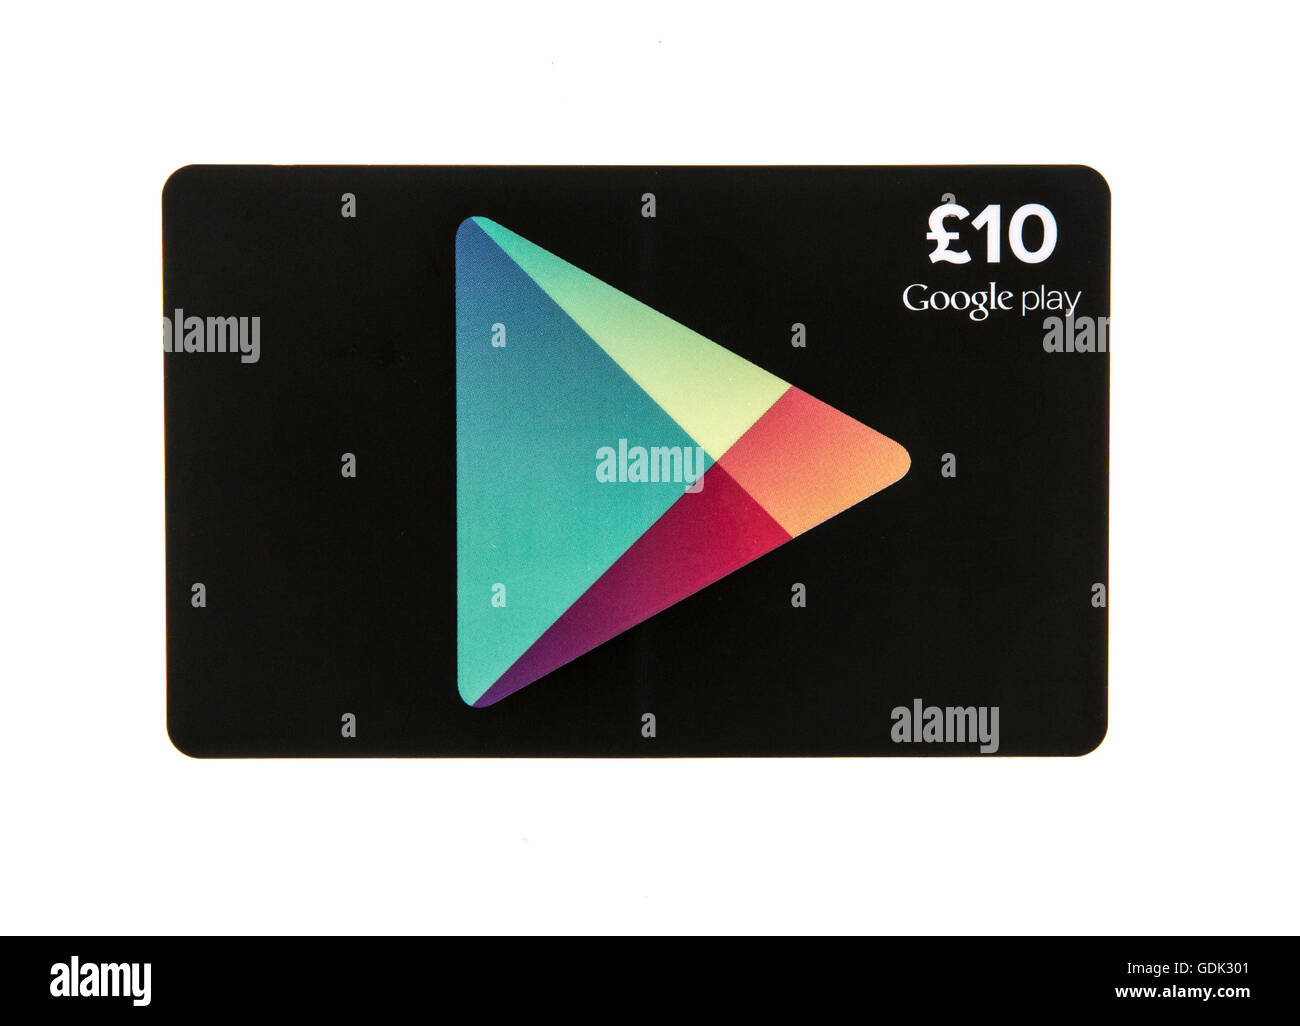 Google Play Card on a white background Stock Photo